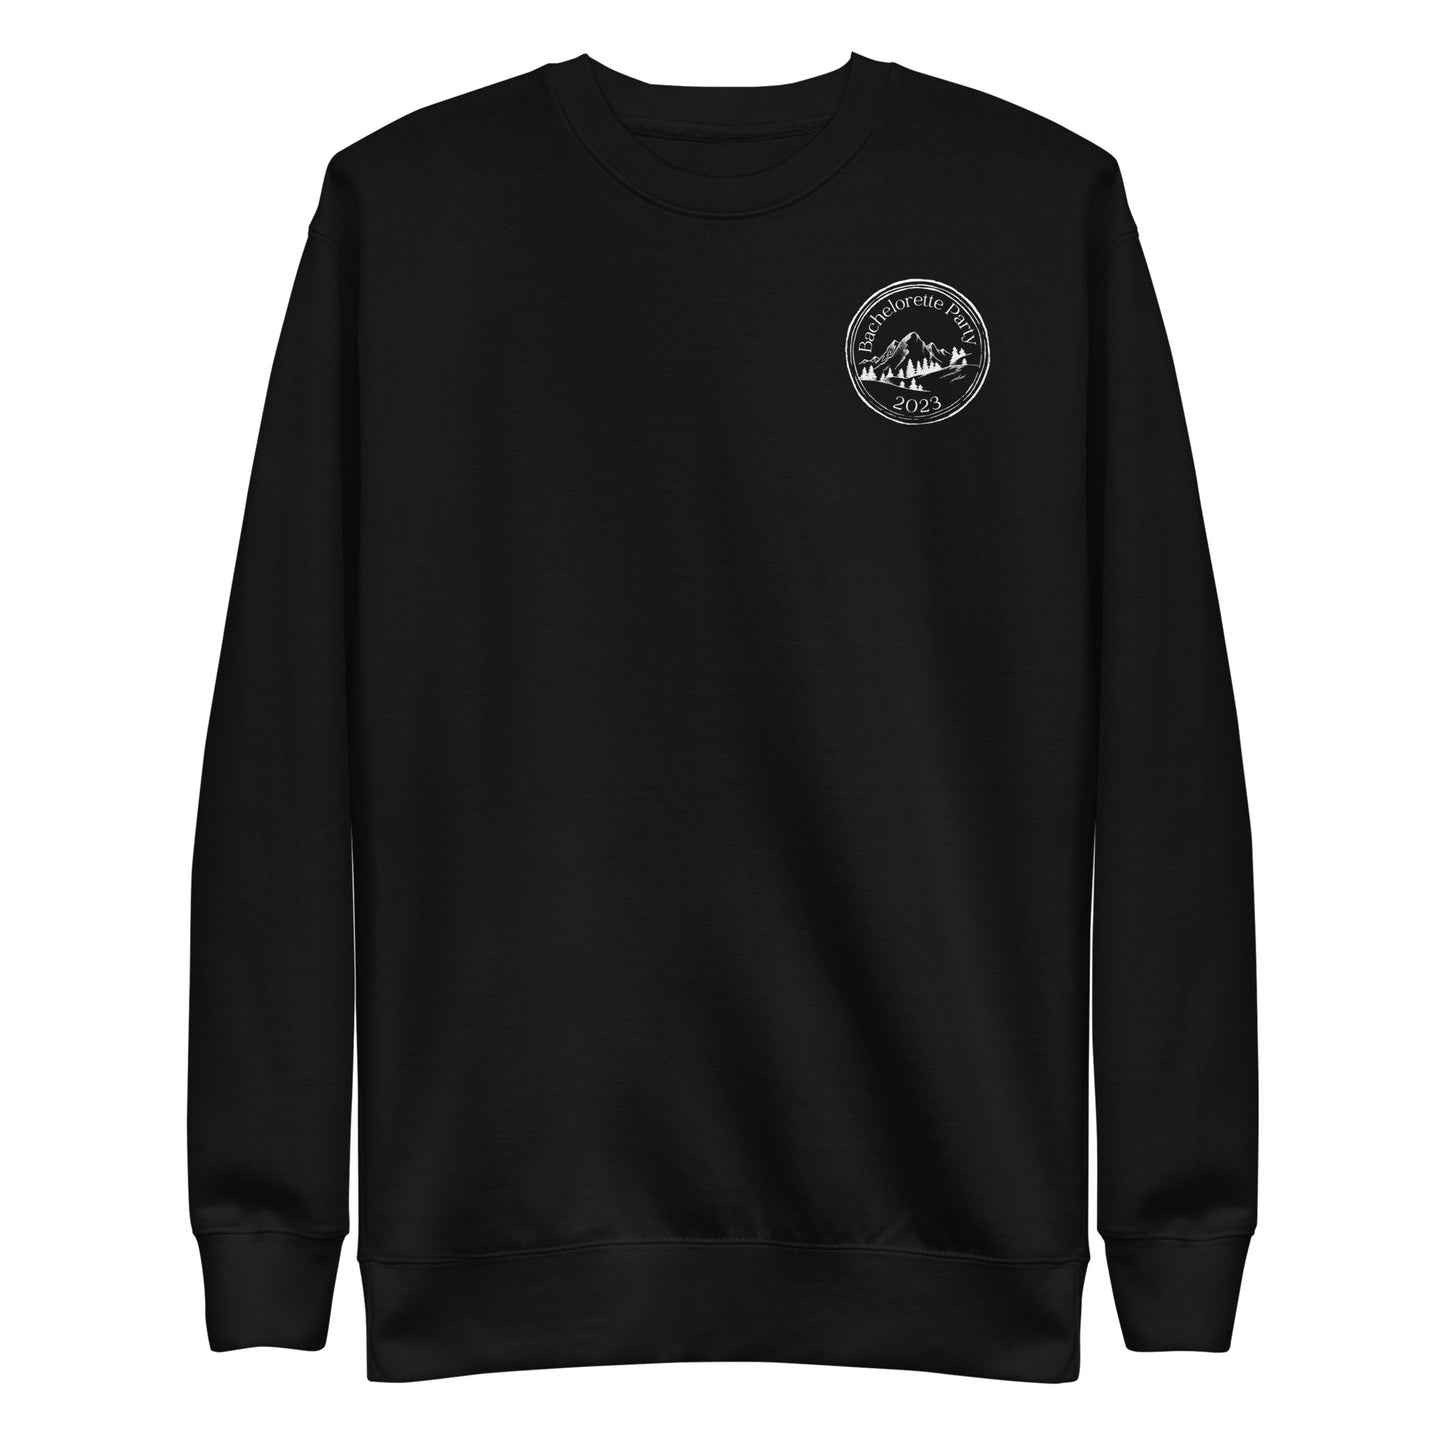 In the Hills "Here for the Party" Bachelorette Crewneck